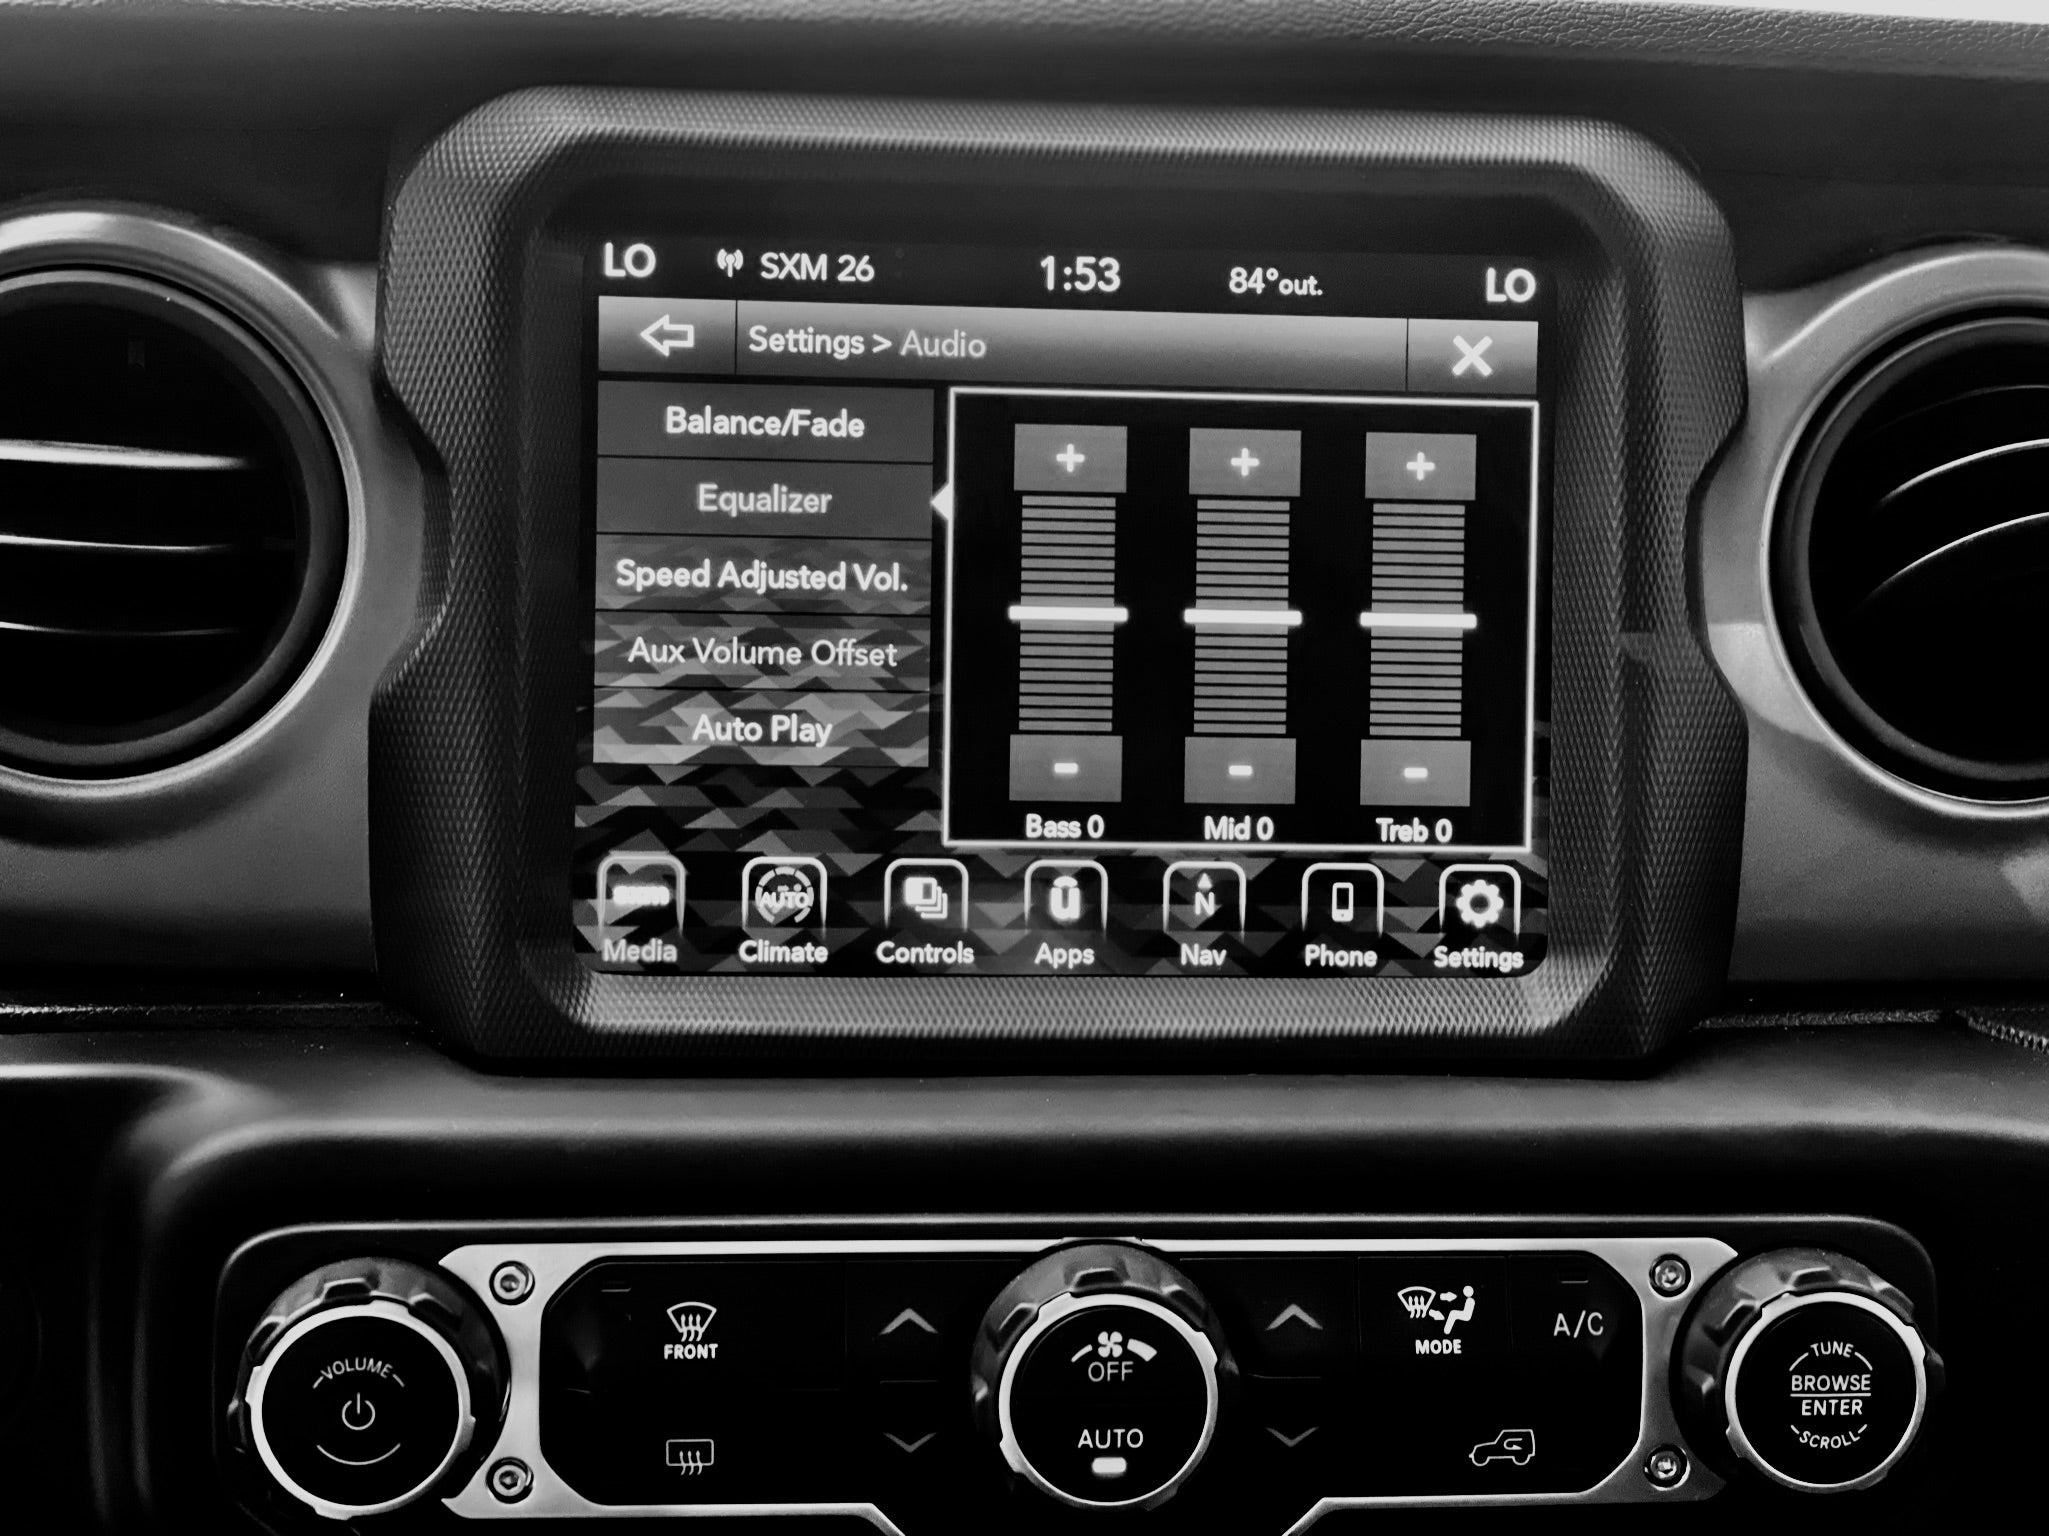 Tone Controls on Your Jeep Radio - Optimal Settings for Sound Quality